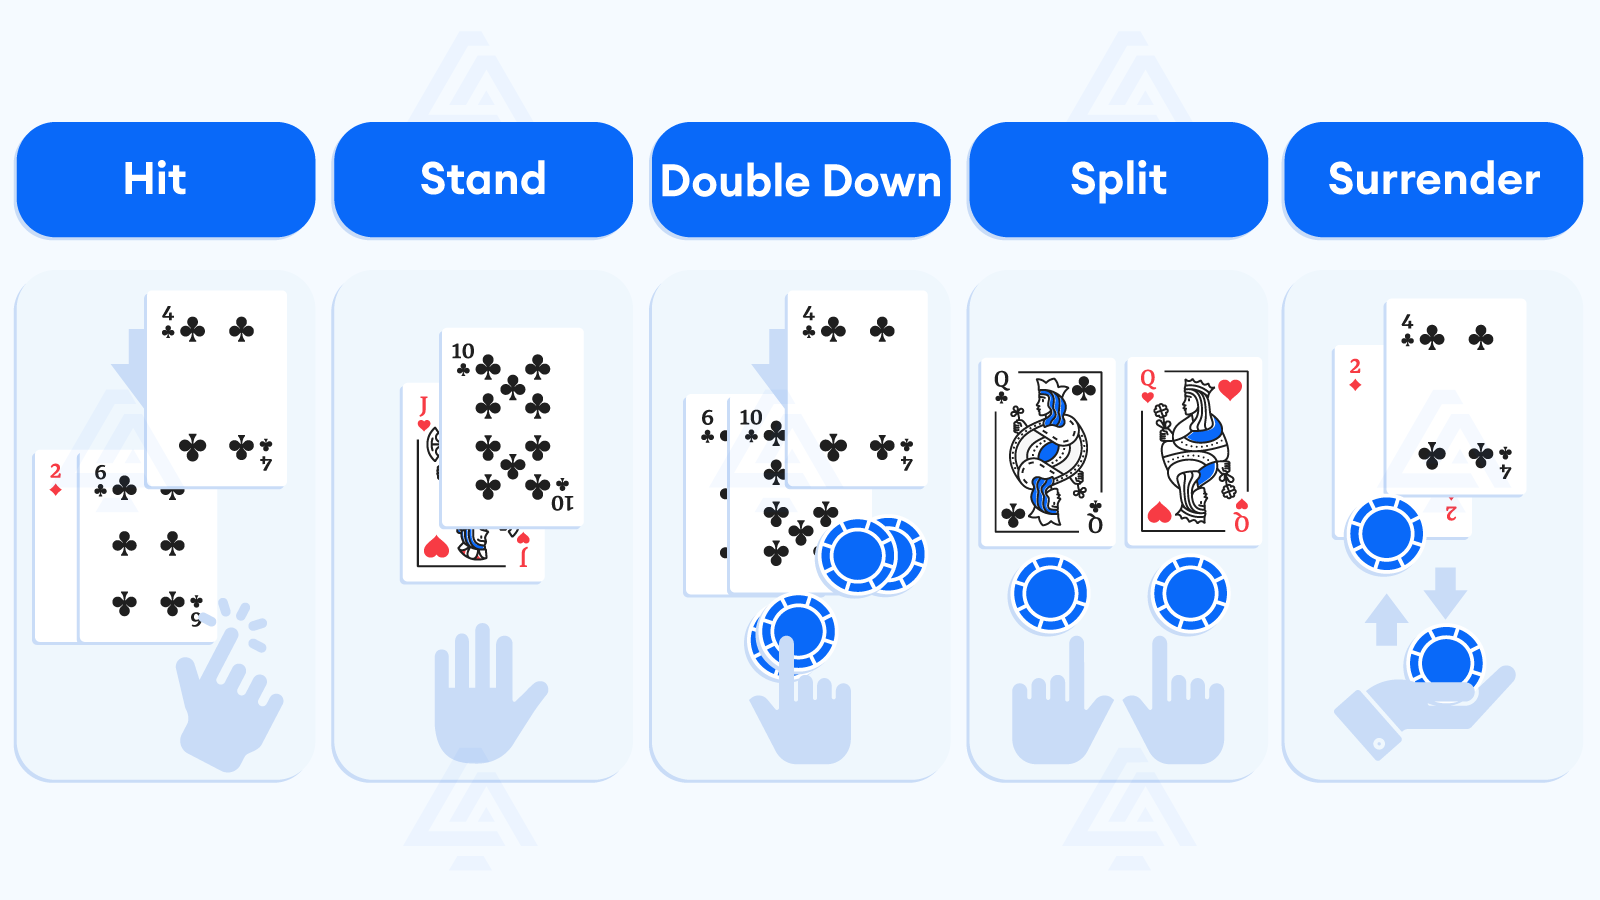 Hit, stand or double down unleashing the power of a Blackjack player’s options